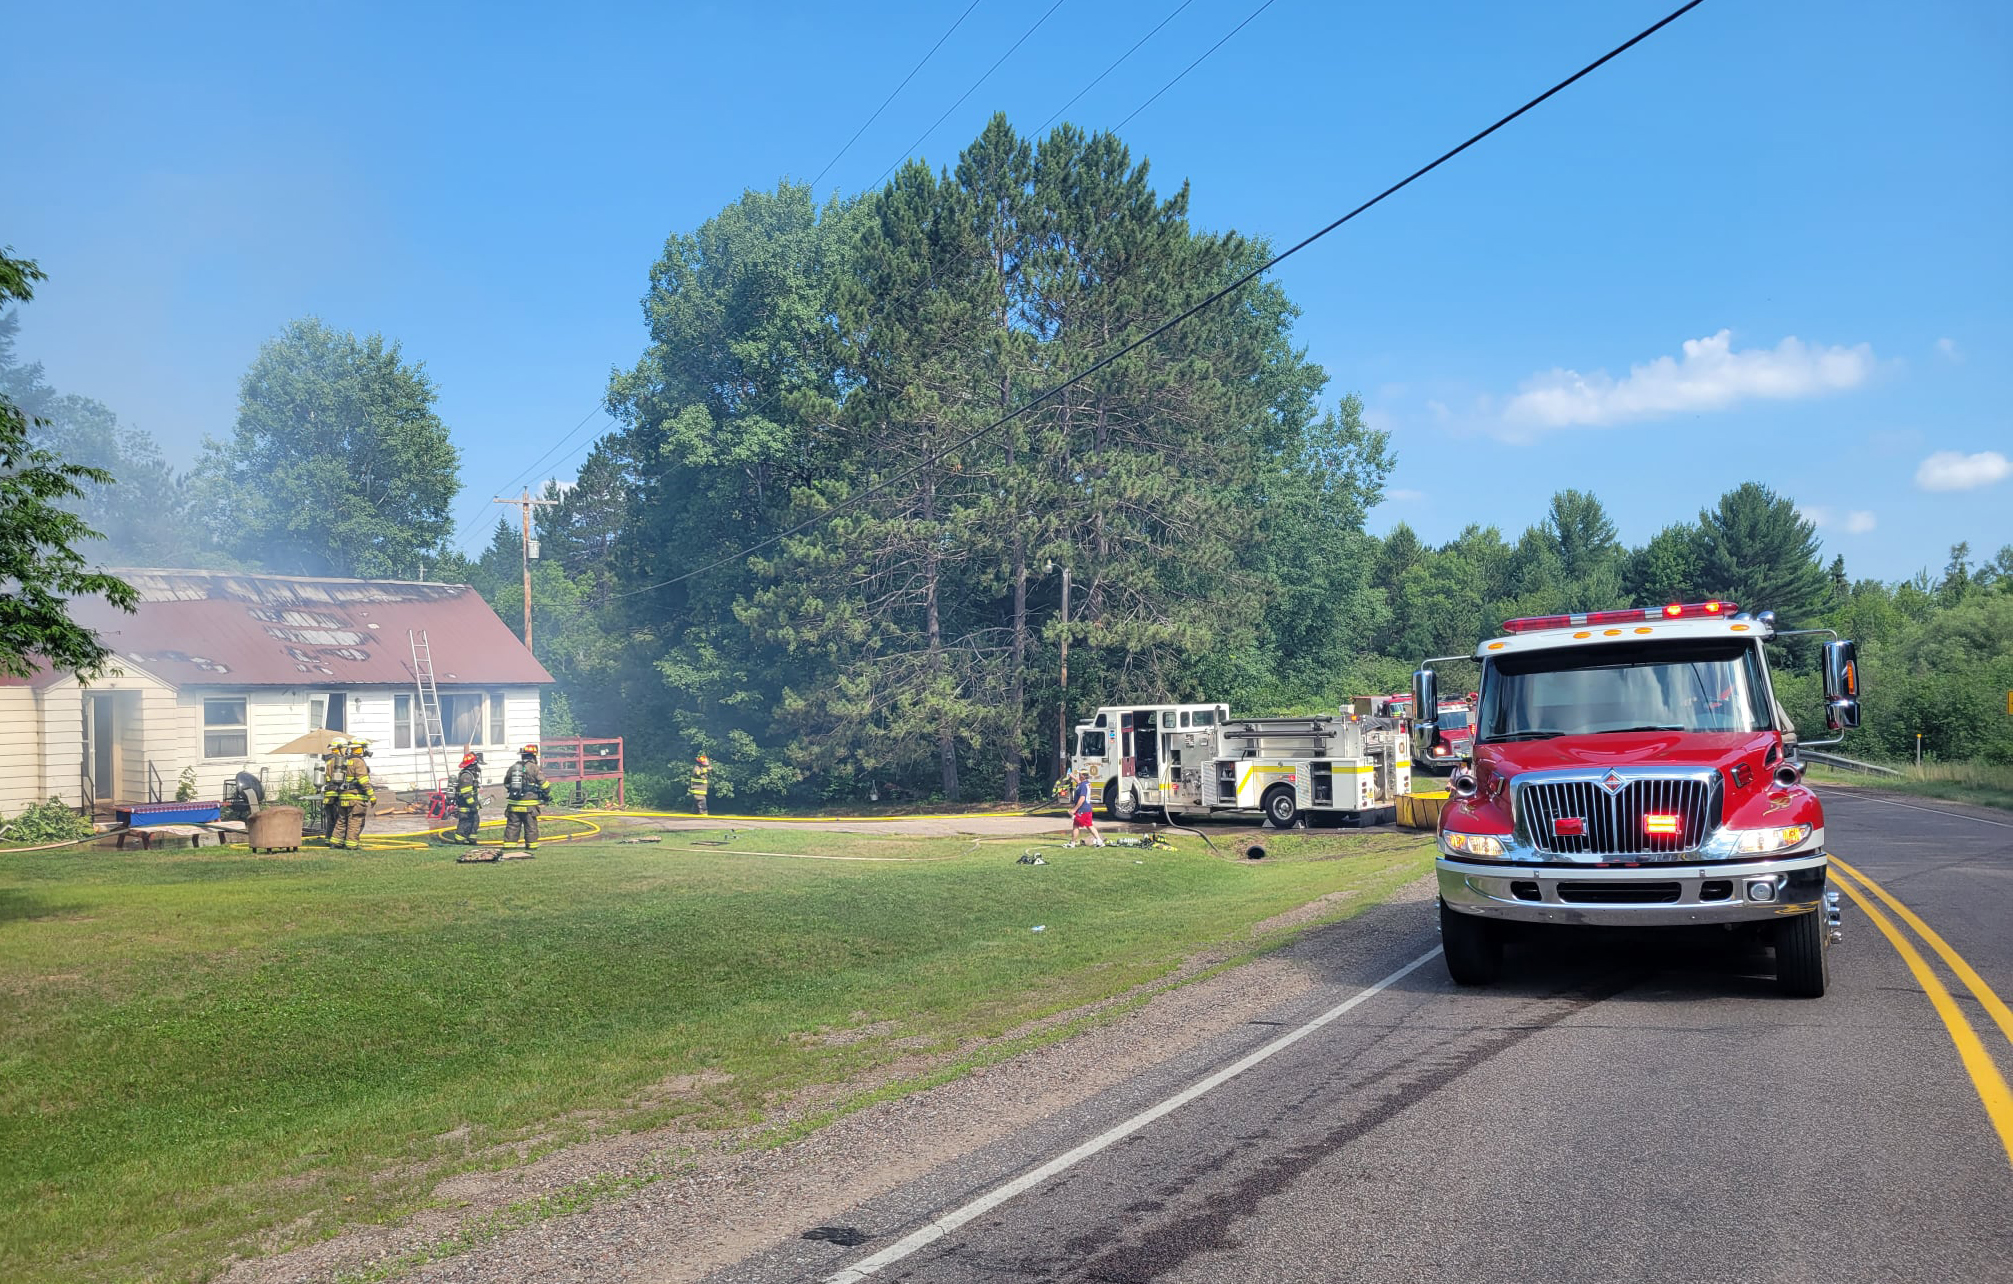 Tomahawk Fire Department, other agencies respond to Town of Bradley structure fire